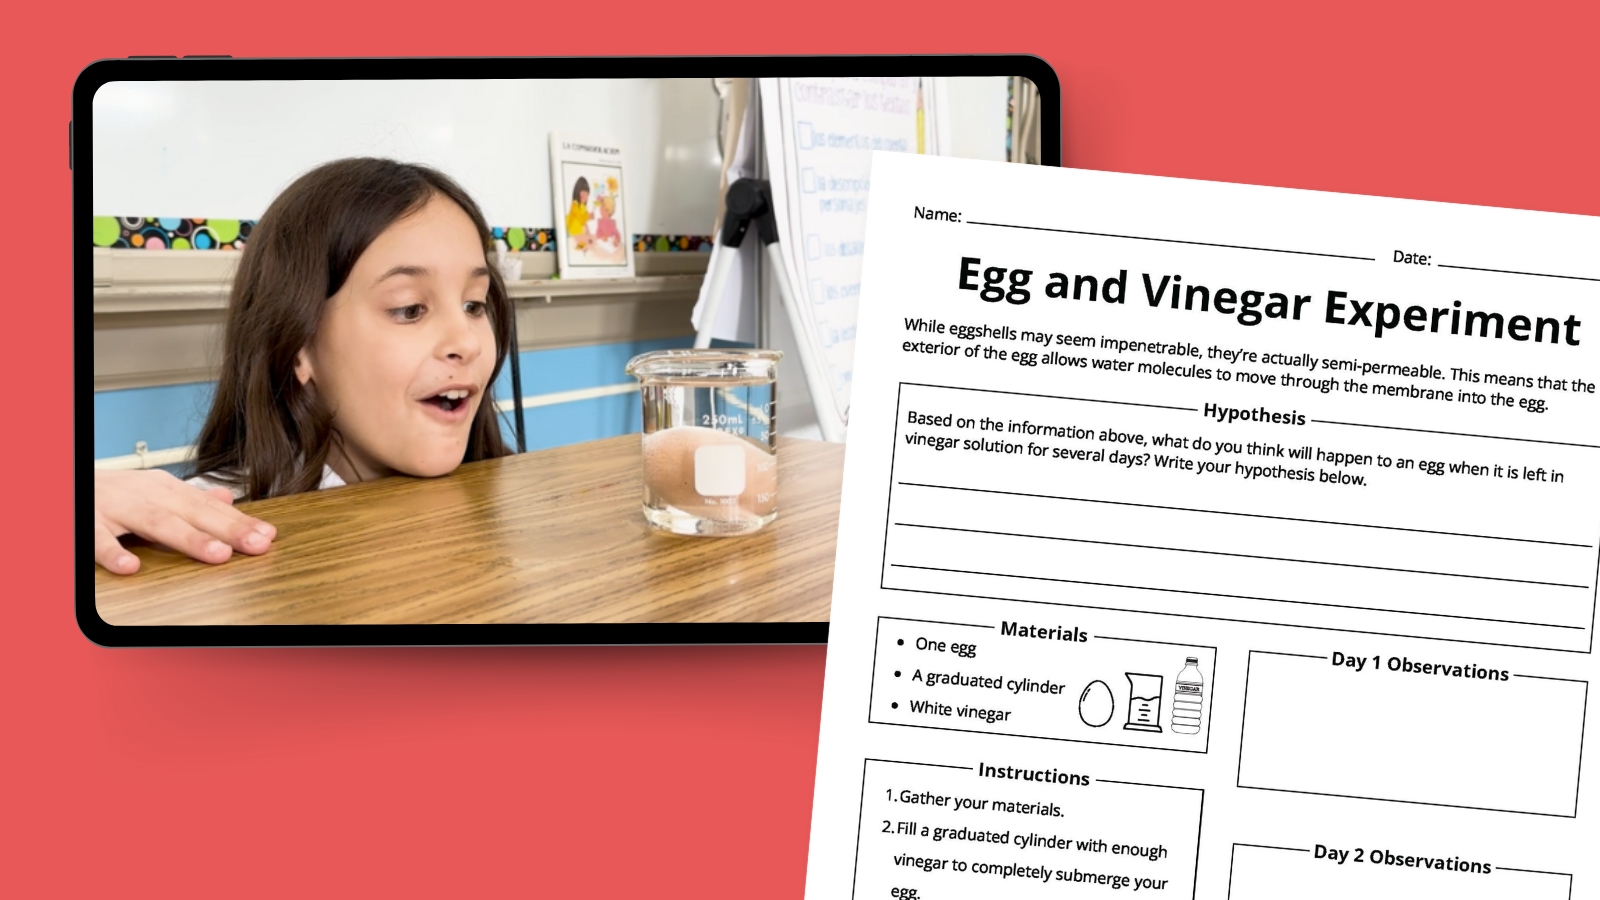 Elementary school girl looks amazed observing egg and vinegar science experiment alongside a printable experiment recording sheet.